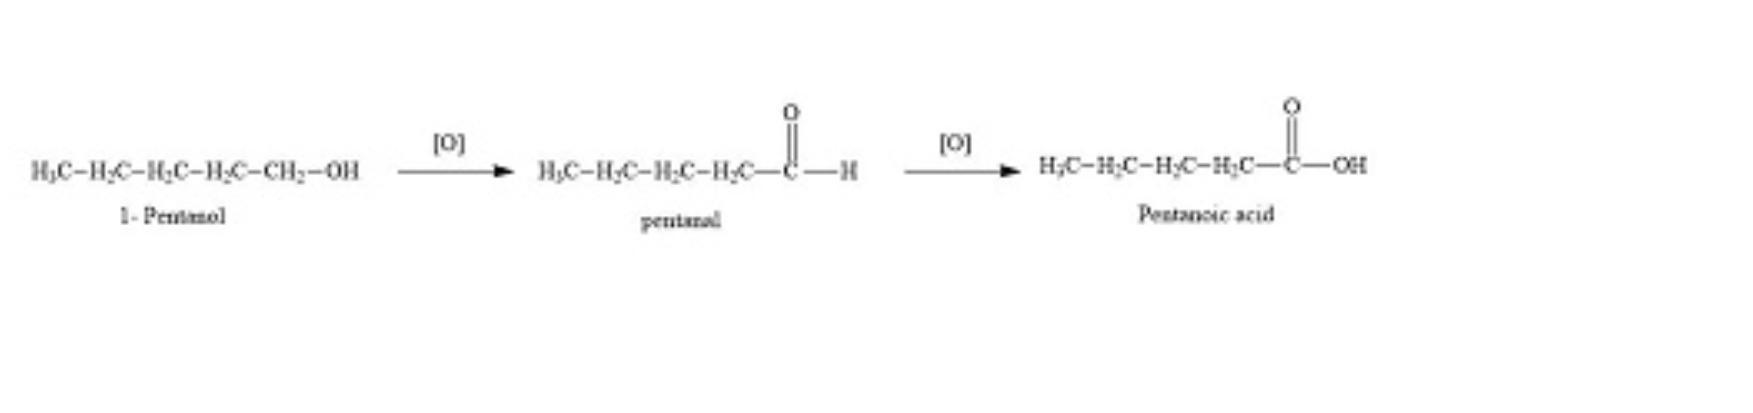 Give The Chemical Formula Of The Alcohol That Results From The Reduction Of N-pentanoic Acid.